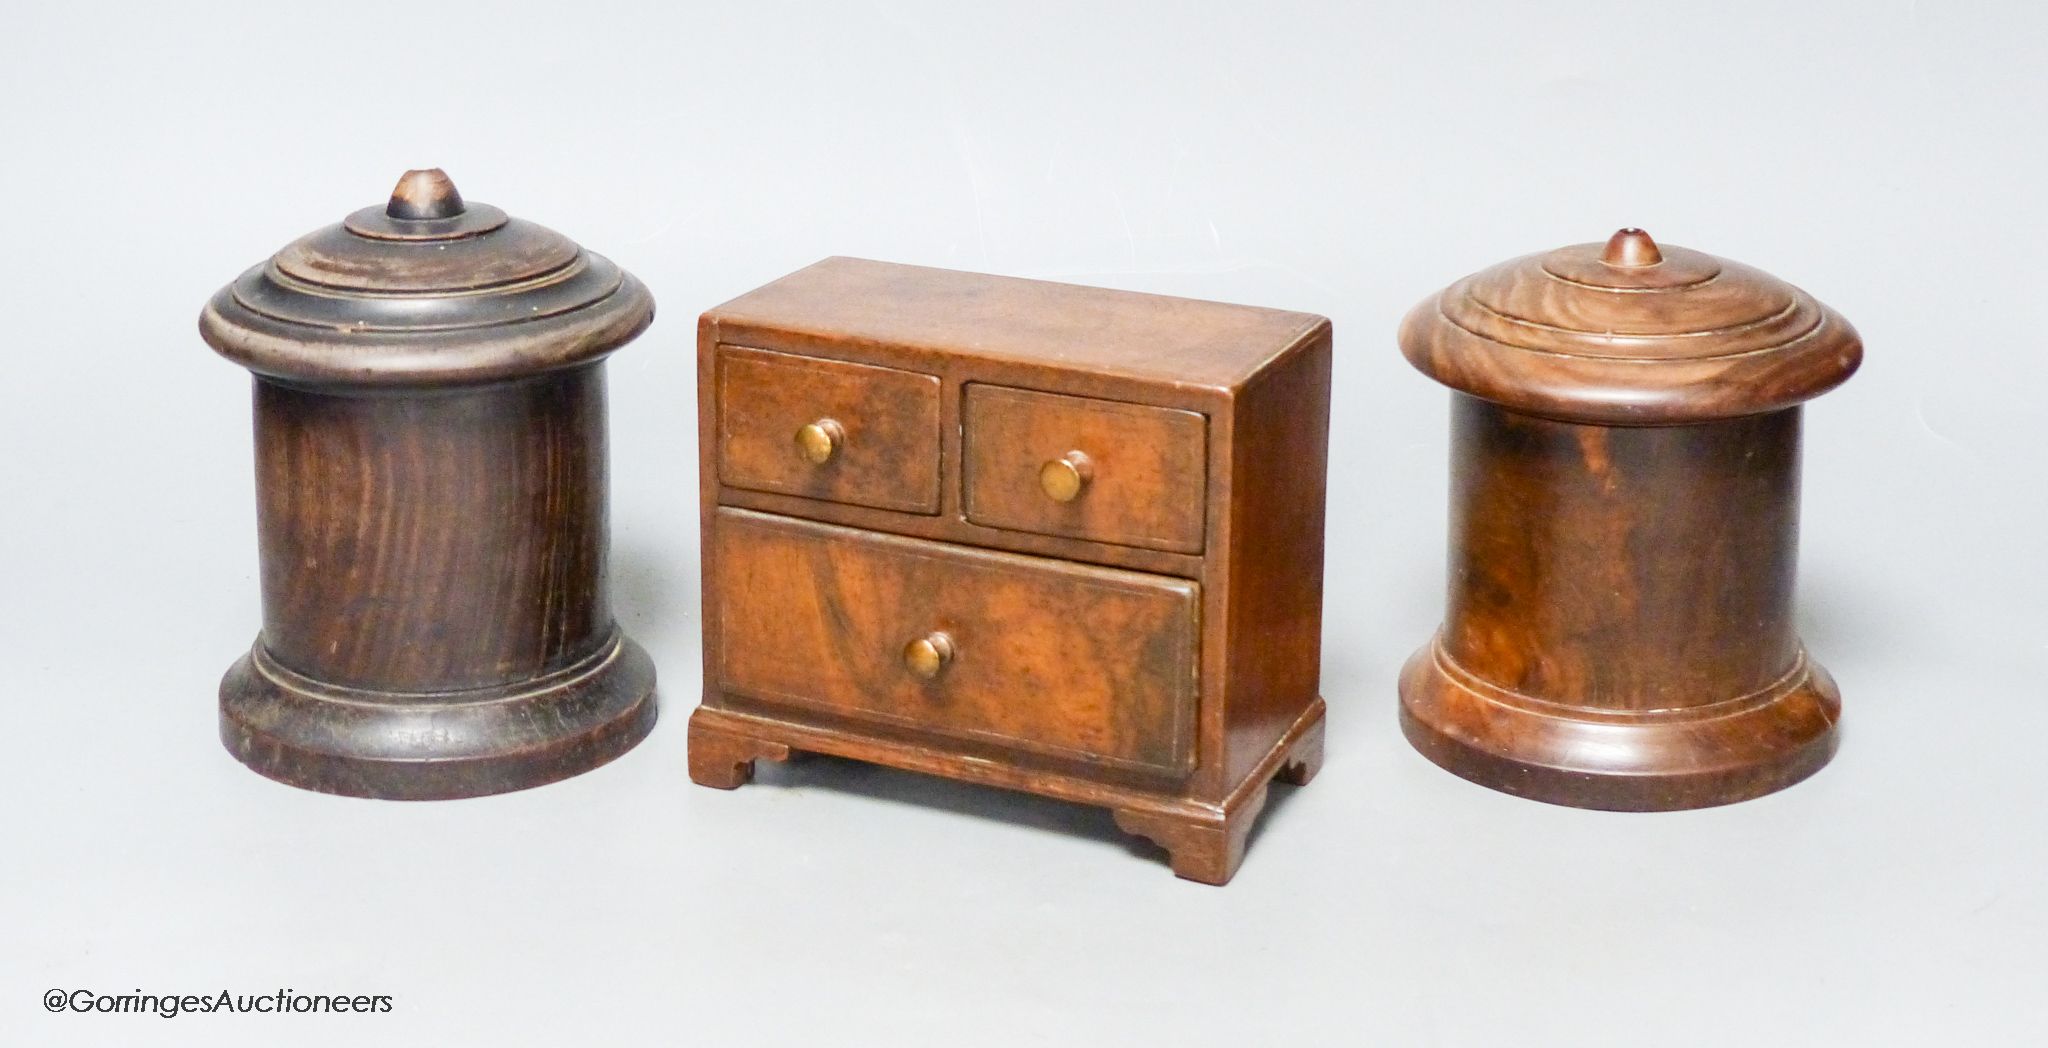 Two 19th-century Lignum vitae string boxes and a Georgian style walnut miniature chest of drawers, height 11.5cm width 13cm